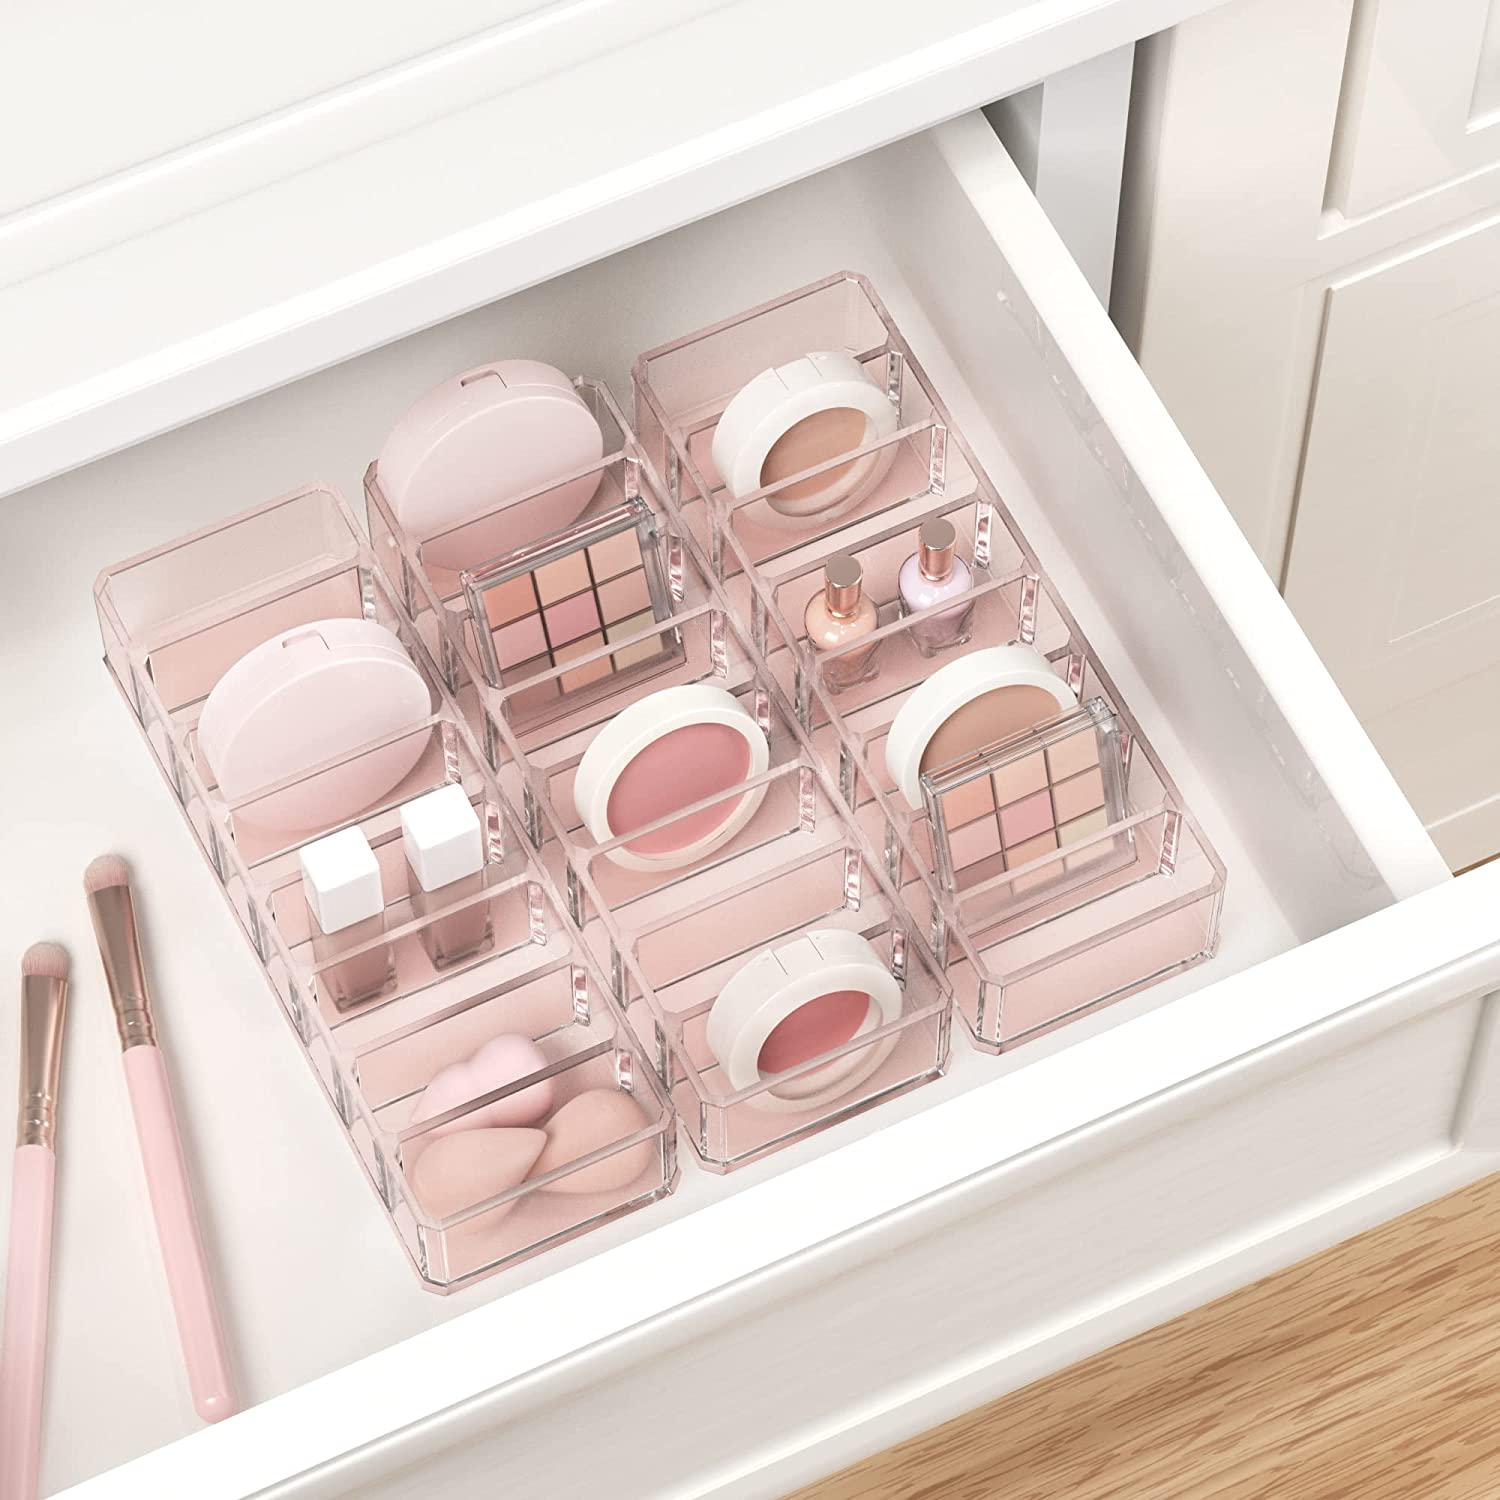 HBlife Clear Acrylic Makeup Compact Organizer, 8 Spaces Vanity Organizer  Stand Eyeshadow Pallet Storage For Lipstick Bronzer Powder Highlighter,  Skincare Cosmetic Display Cases For Bathroom Pink